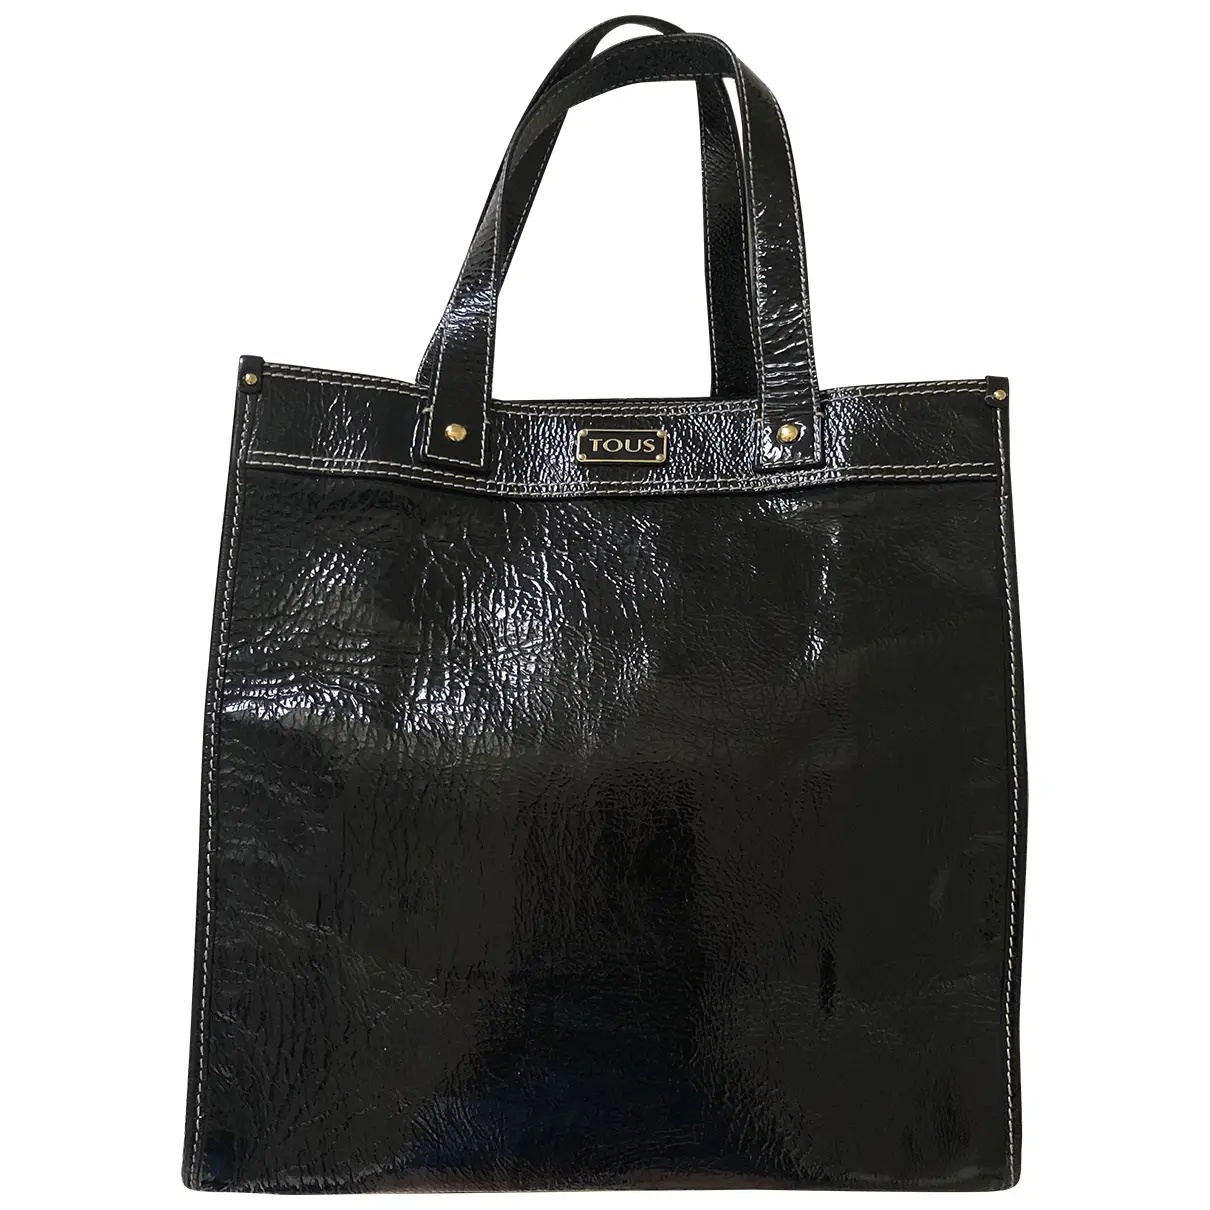 Patent leather tote Atelier Tous